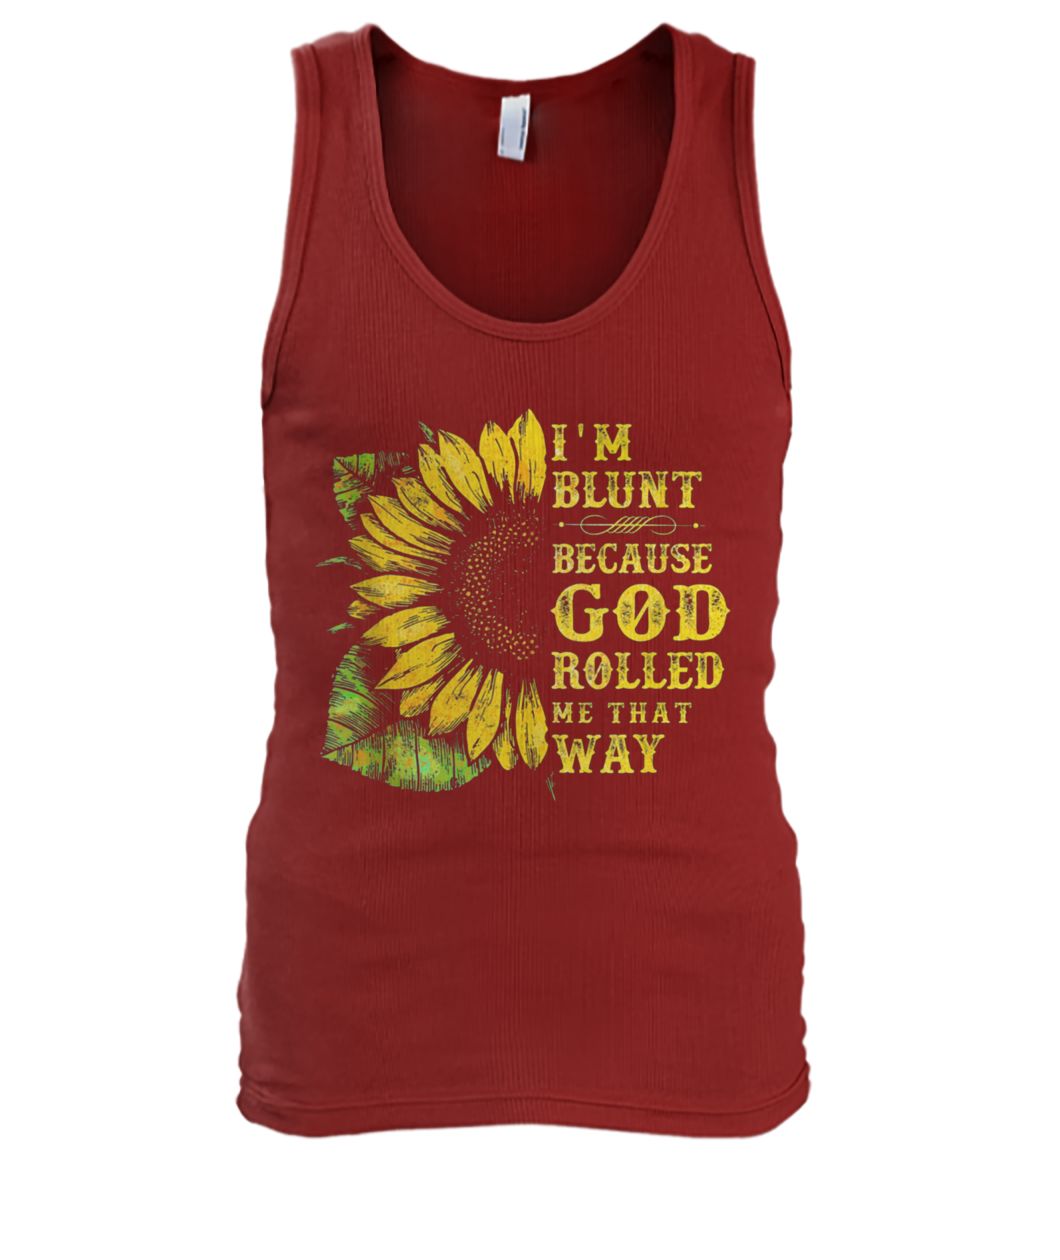 Sunflower I'm blunt because god rolled me that way men's tank top